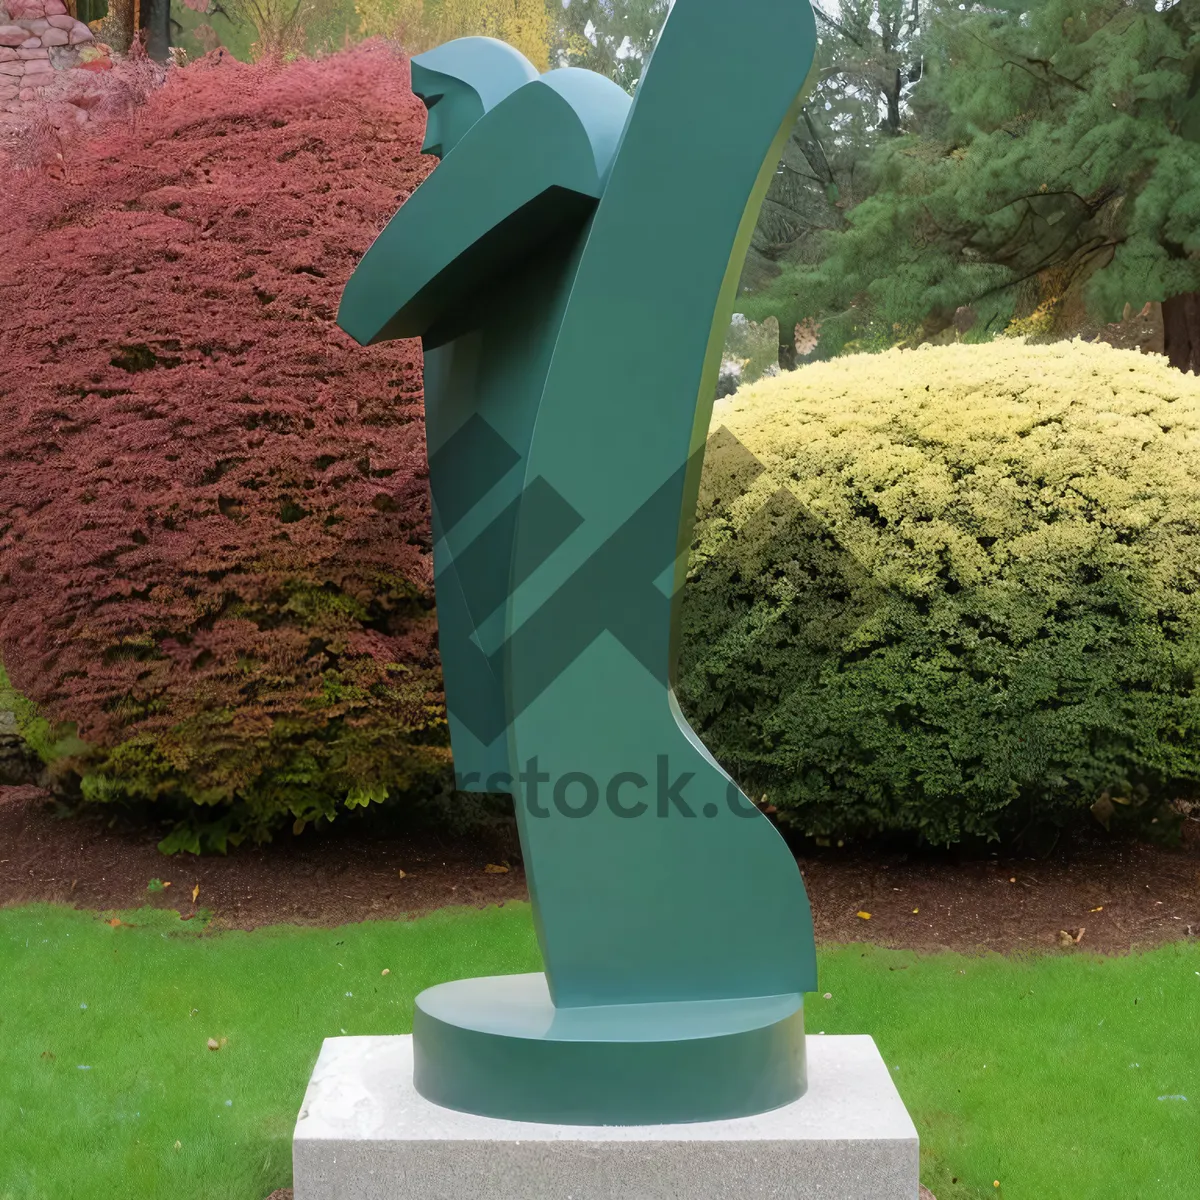 Picture of Timepiece standing on grass in garden.